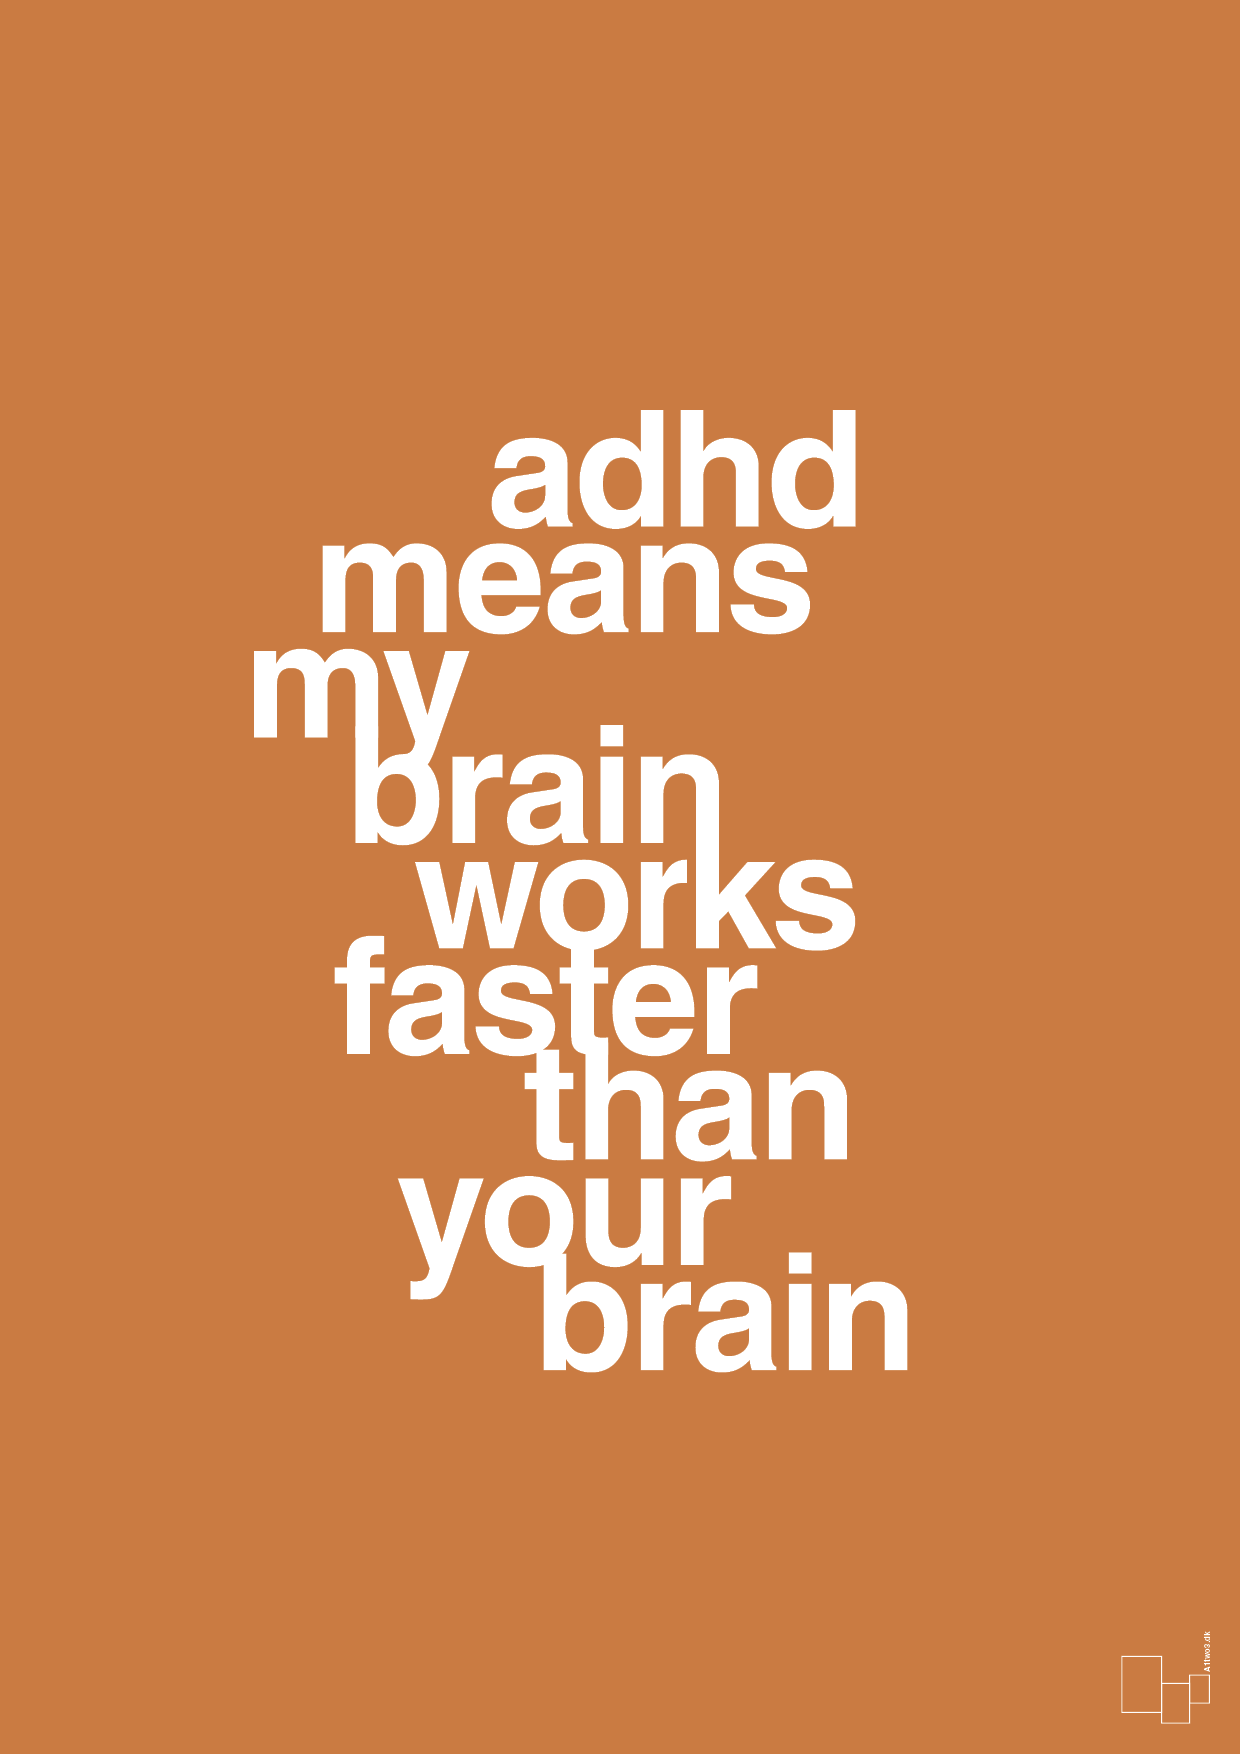 adhd means my brain works faster than your brain - Plakat med Samfund i Rumba Orange